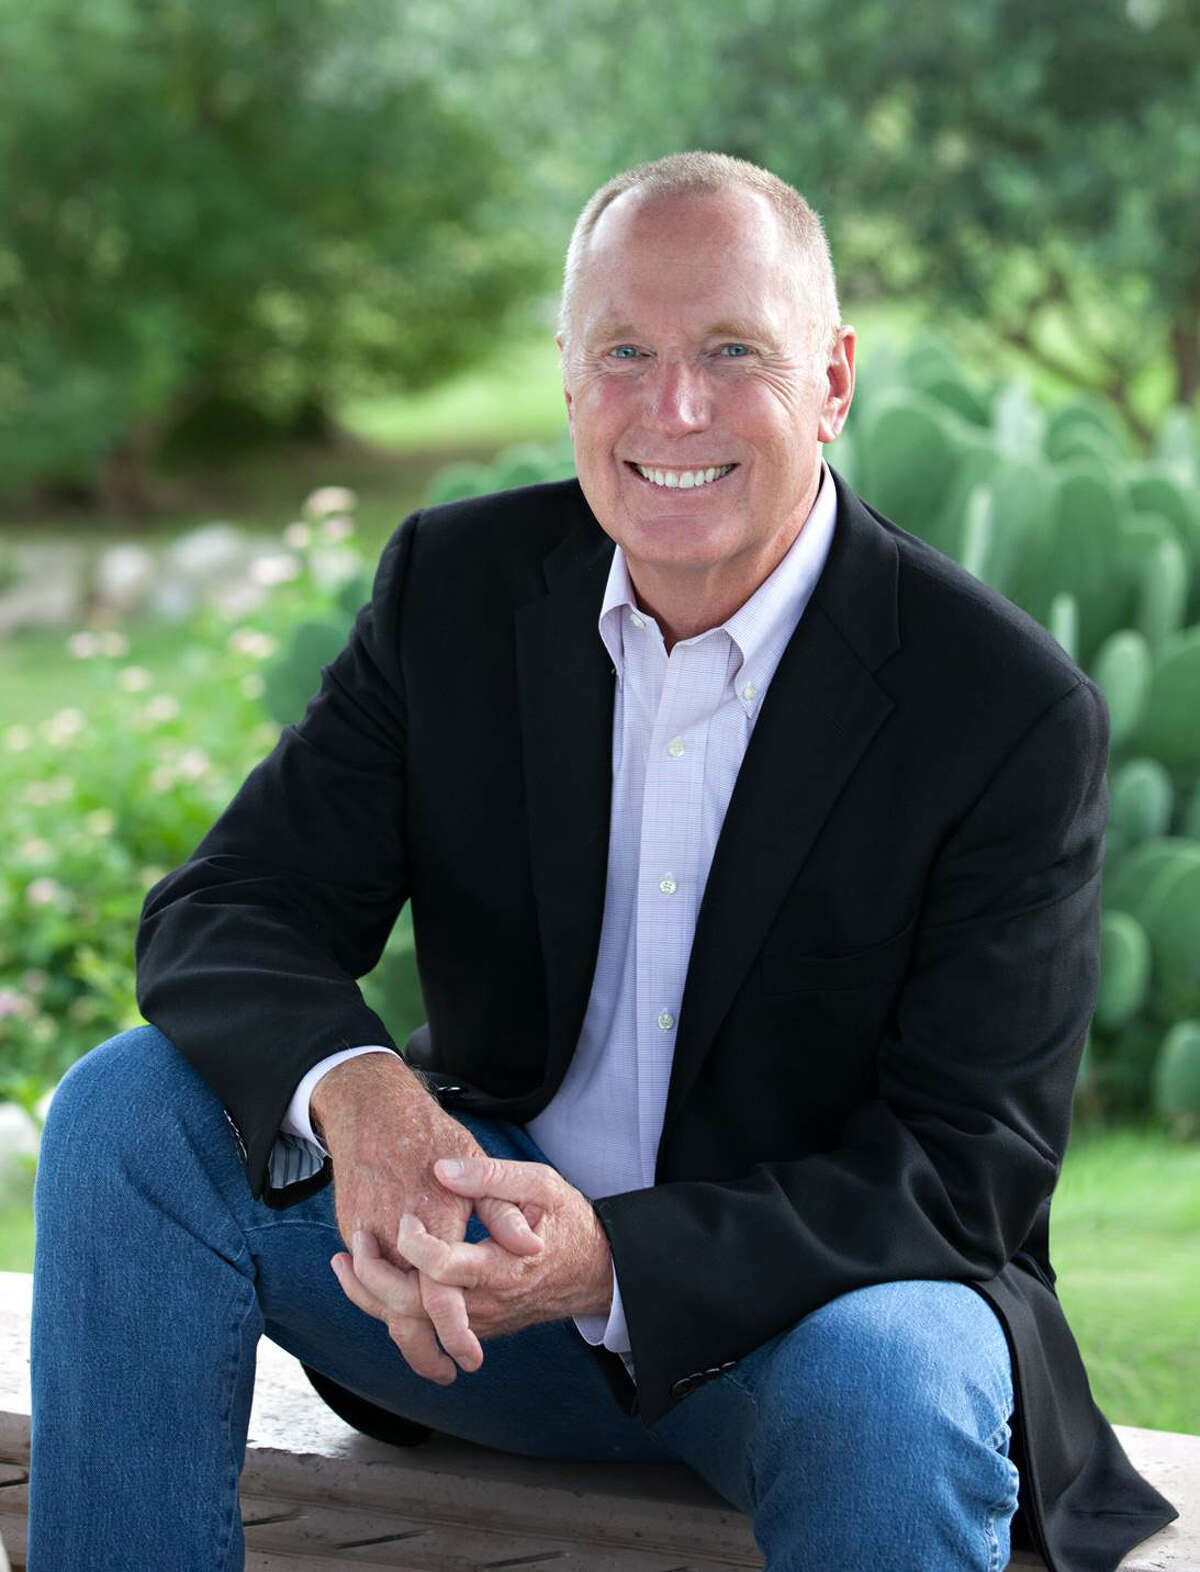 Best-selling author Max Lucado is minister of preaching at Oak Hills Church in San Antonio. He preaches half the year at this congregation and spends the rest of his time traveling and writing the rest of the year.